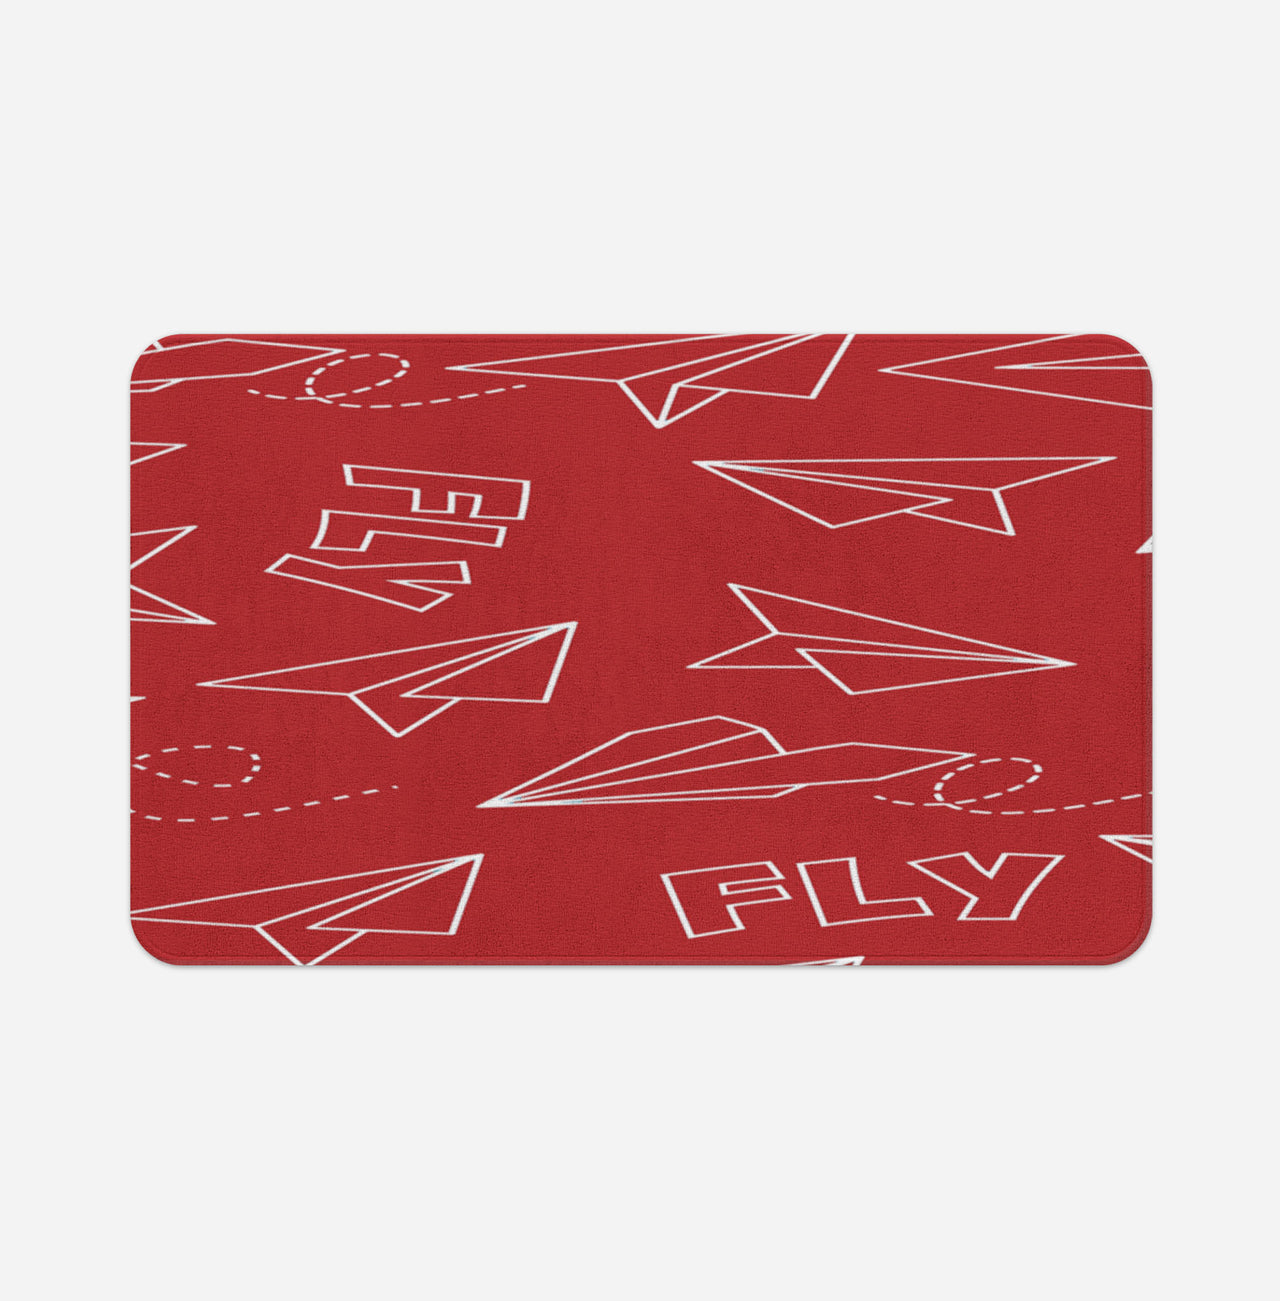 Paper Airplane & Fly-Red Designed Bath Mats